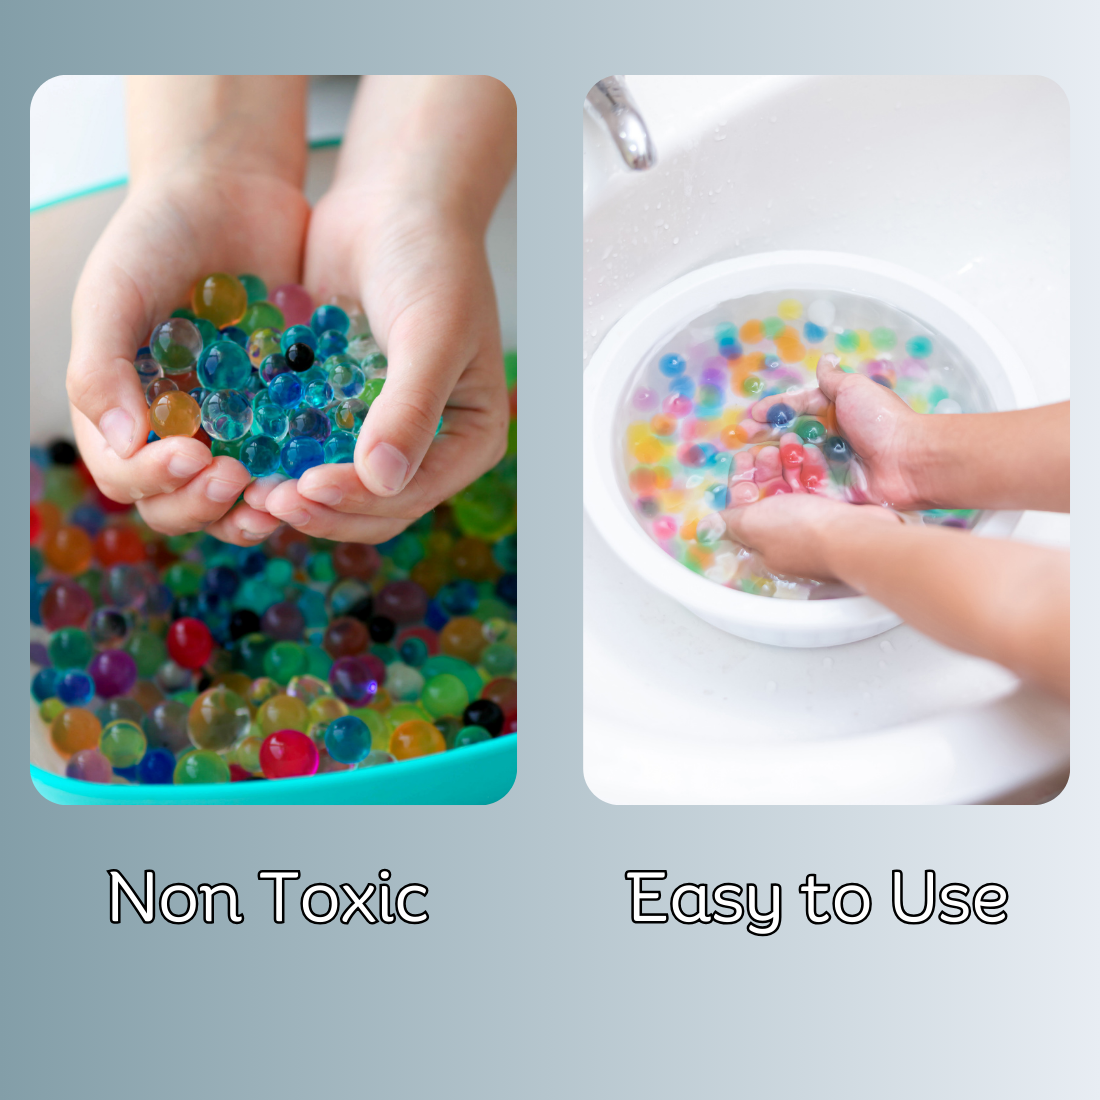 Approximately 5000 Blue Water Beads For Vase Filling And Plant Growing With  Water